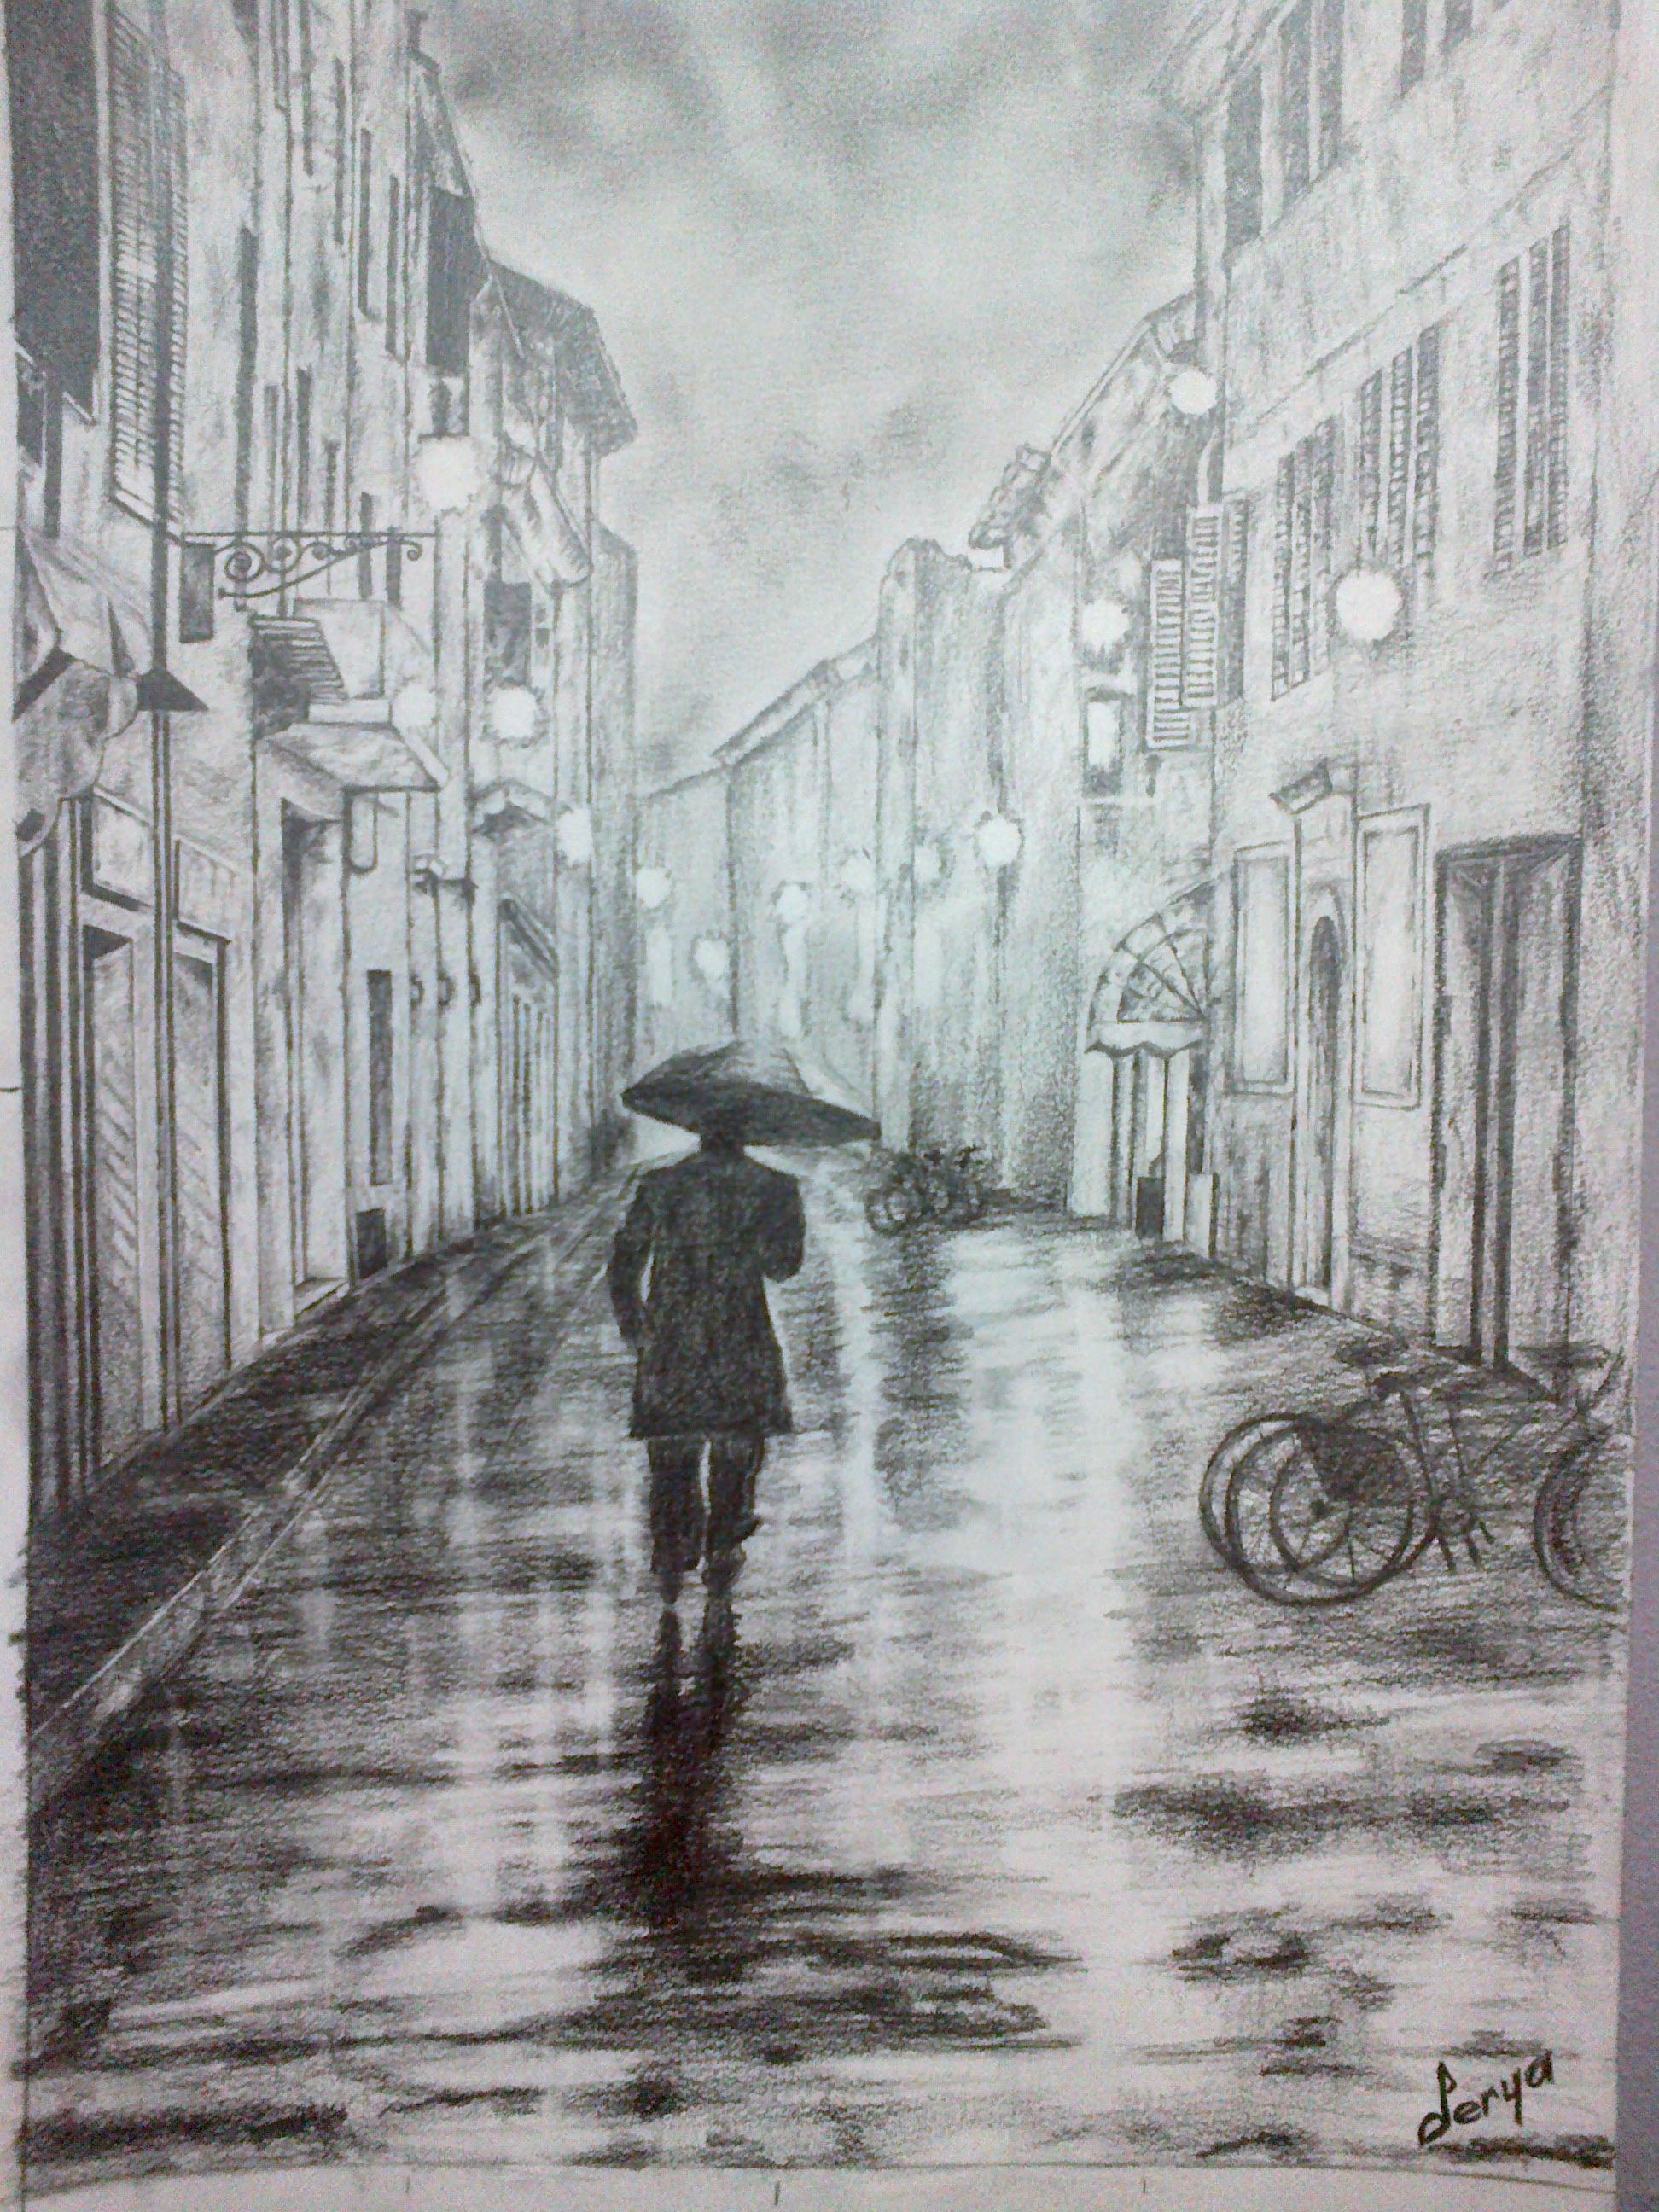 Rainy Day Sketch at Explore collection of Rainy